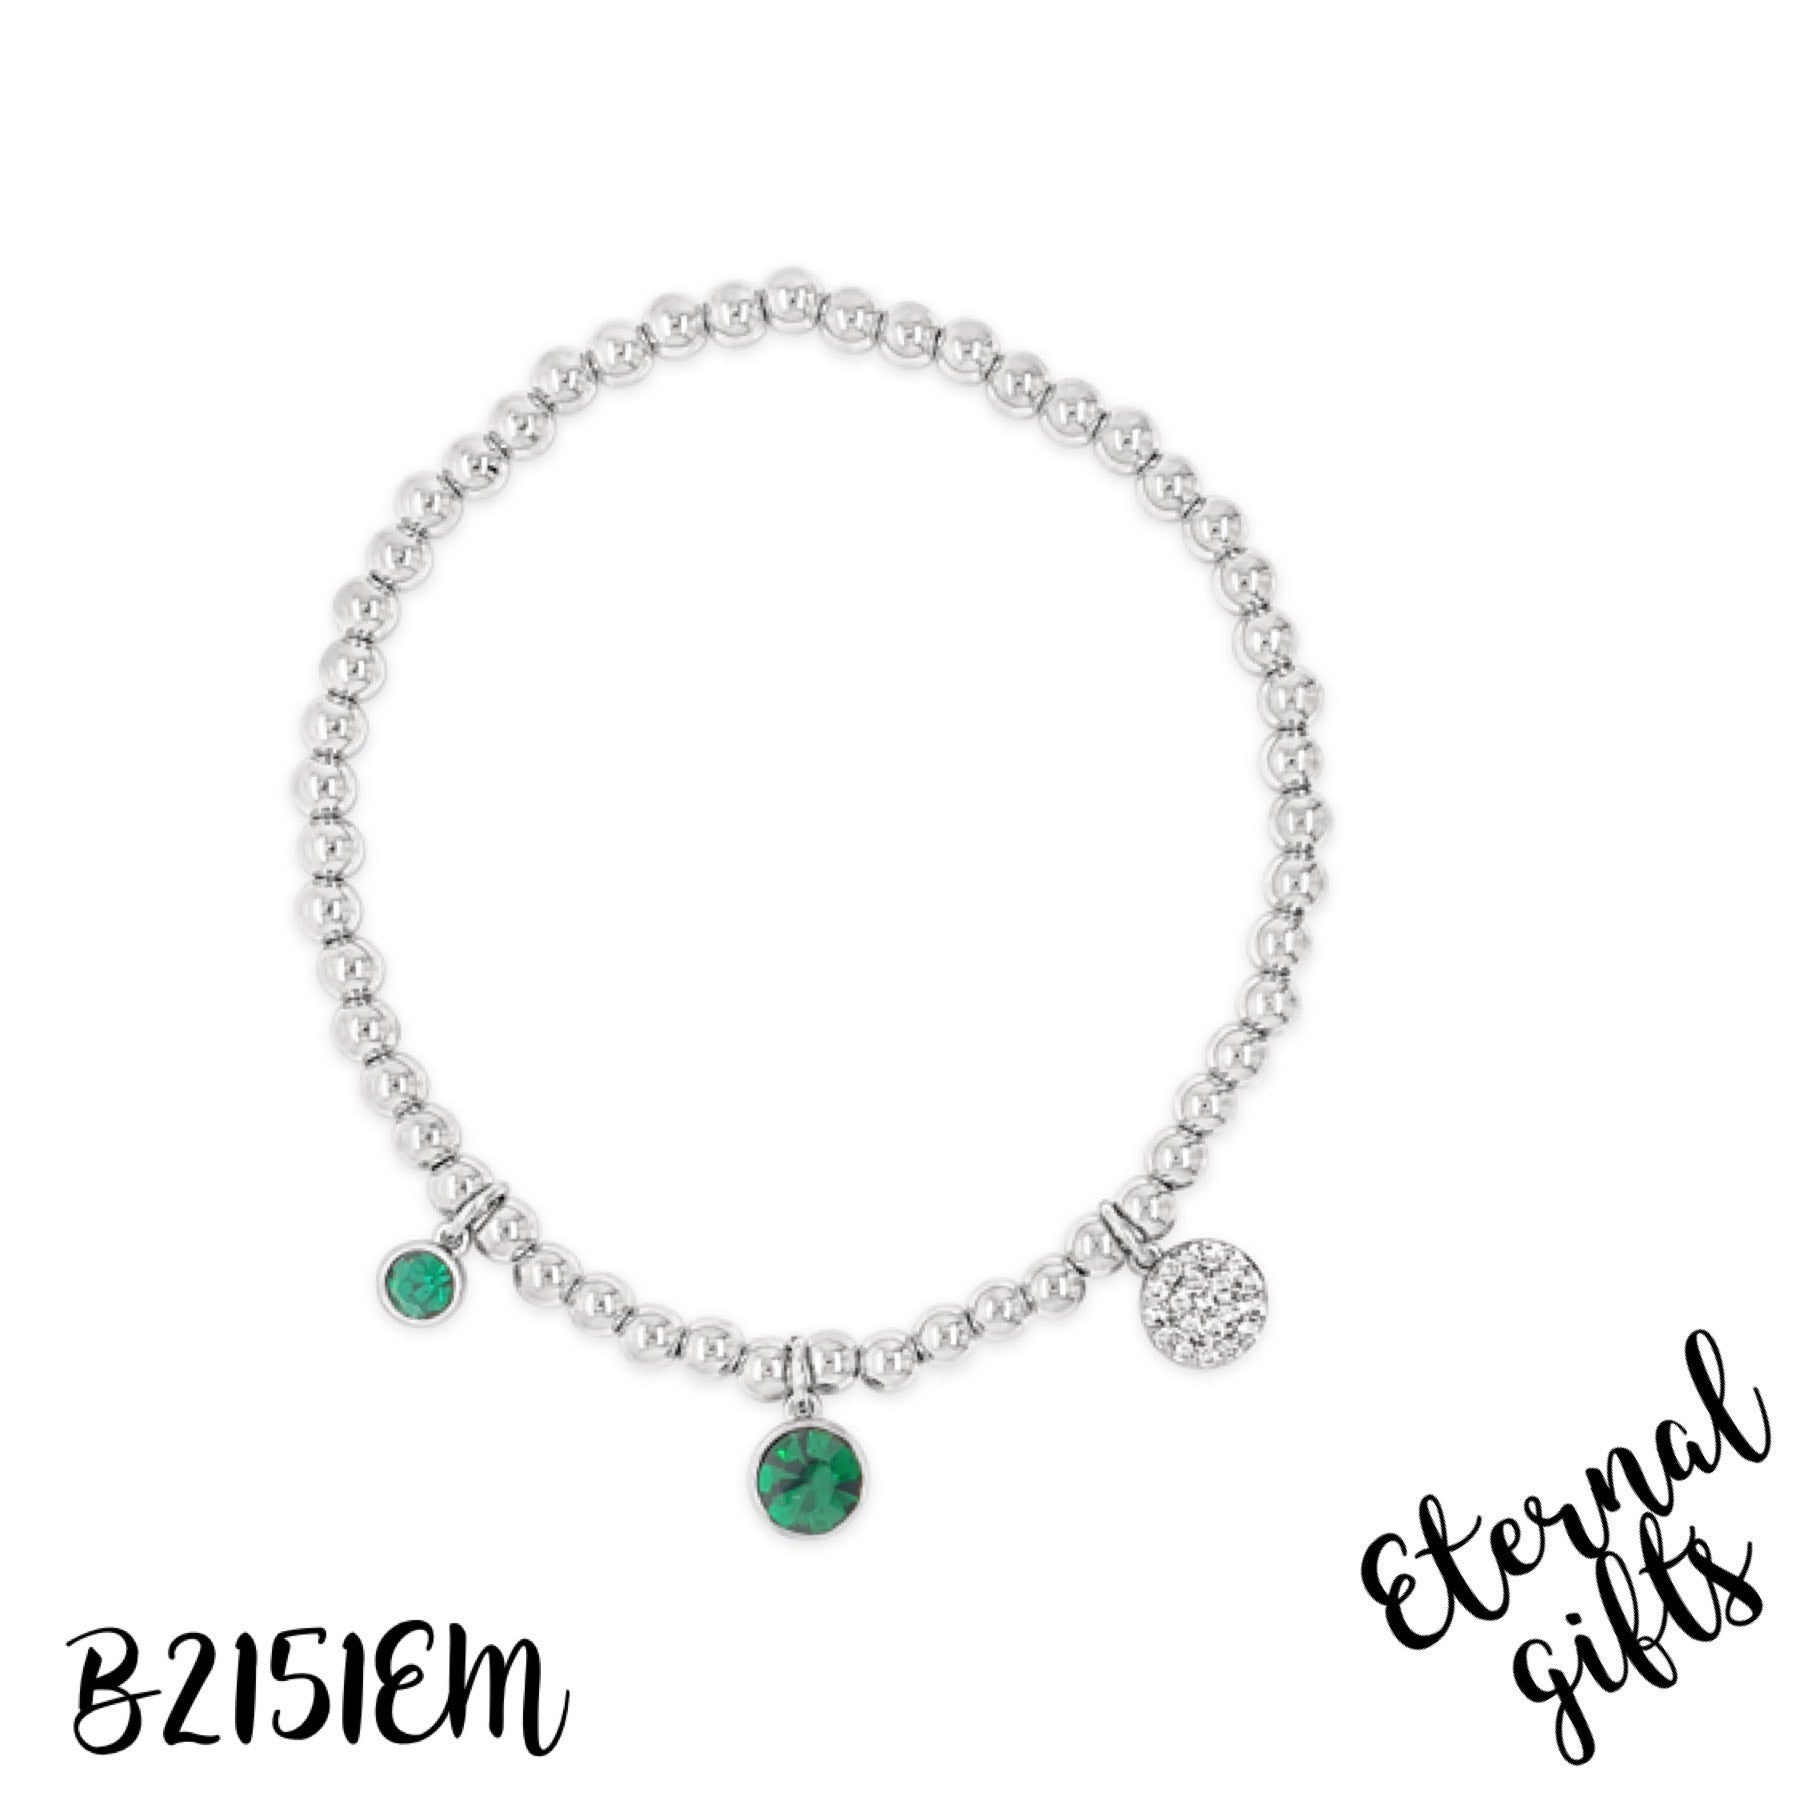 Beaded Silver Bracelet The Emerald Collection Absolute Jewellery B2151EM